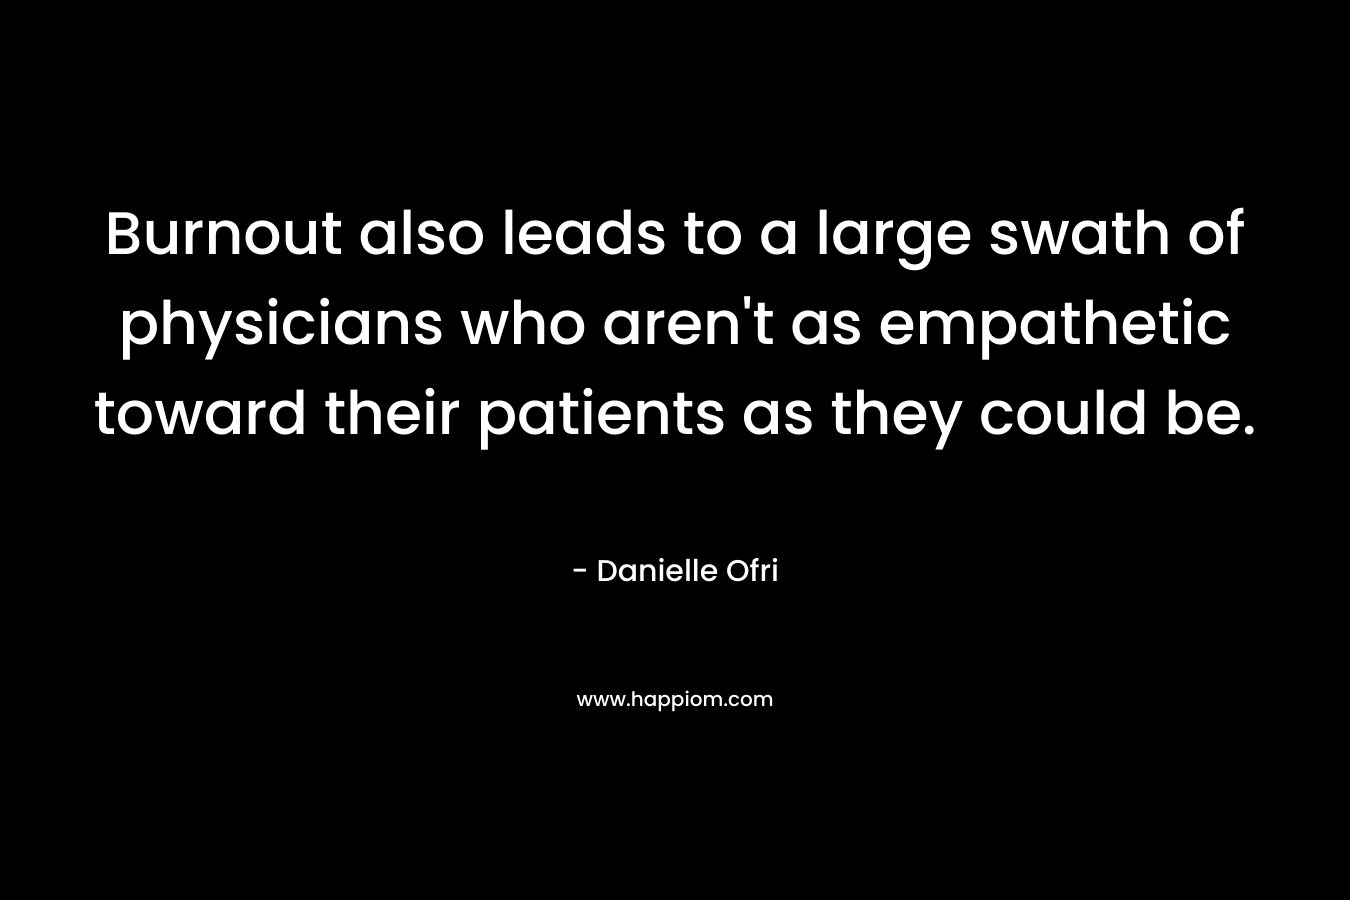 Burnout also leads to a large swath of physicians who aren’t as empathetic toward their patients as they could be. – Danielle Ofri